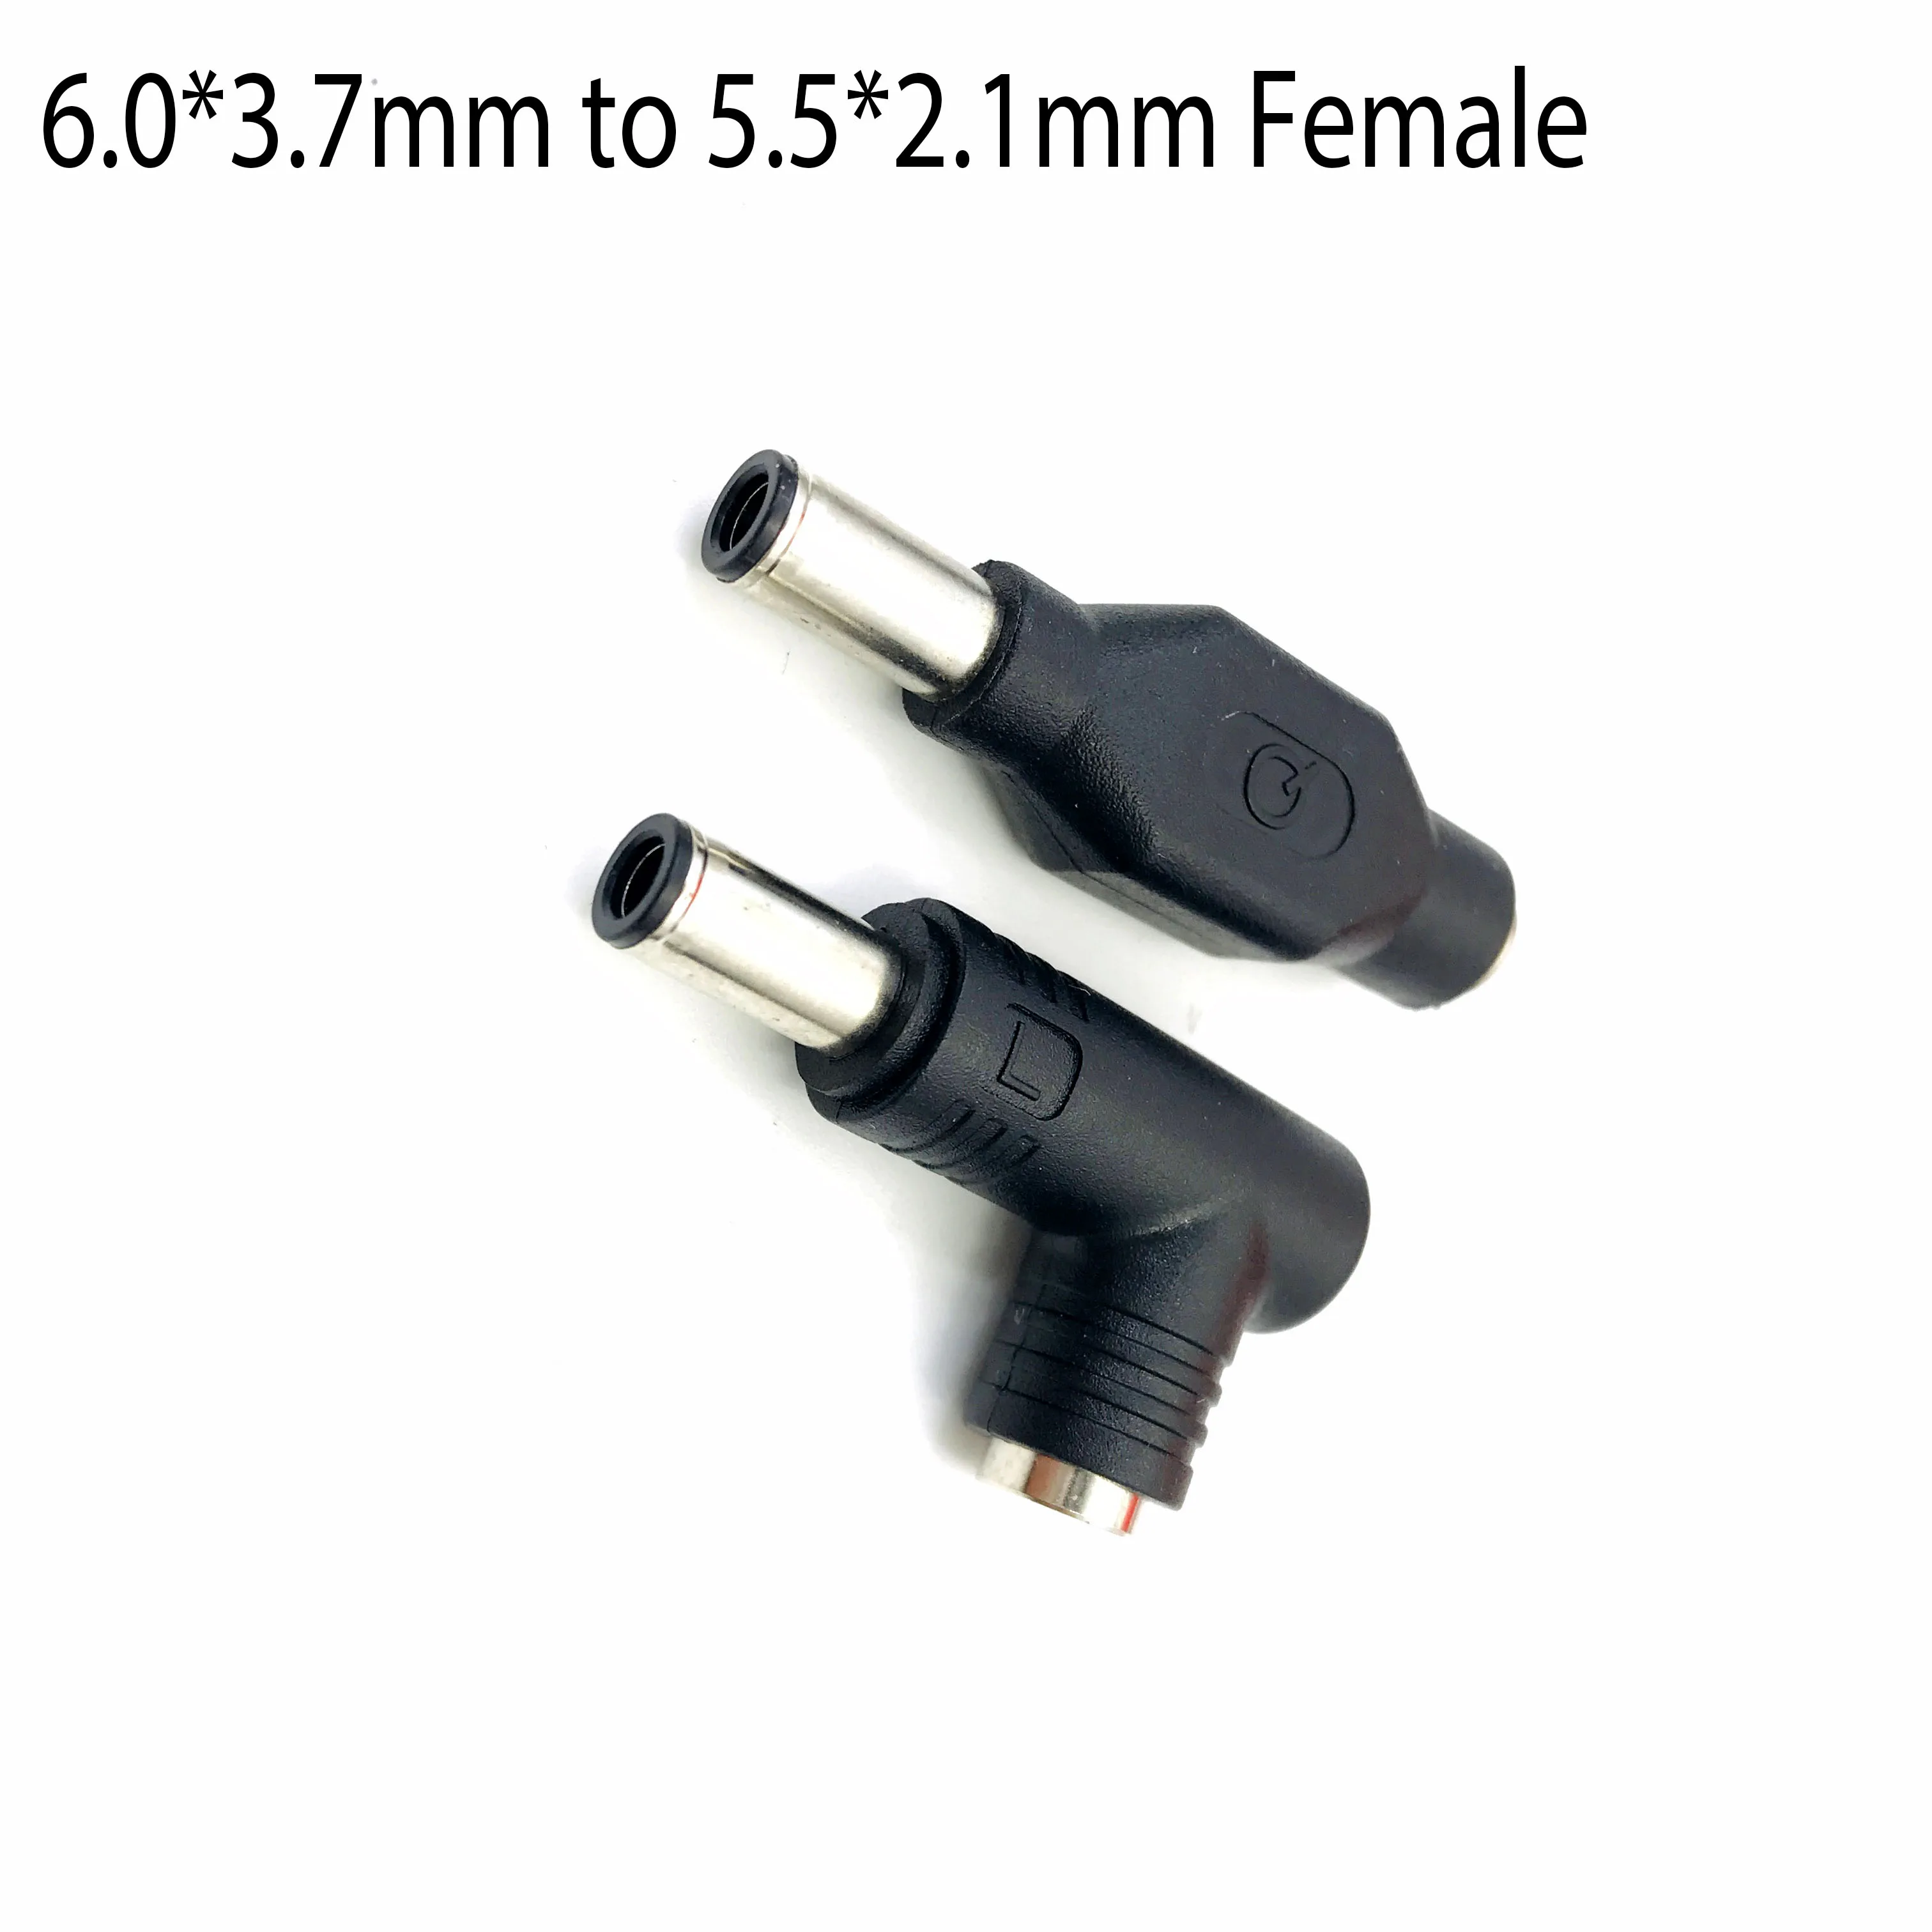 

5.5x2.1 2.5m to 6.0x3.7mm with Pin DC Power Supply Adapter Connector Laptop Charging Plug Converter for Asus TUF Gaming Notebook